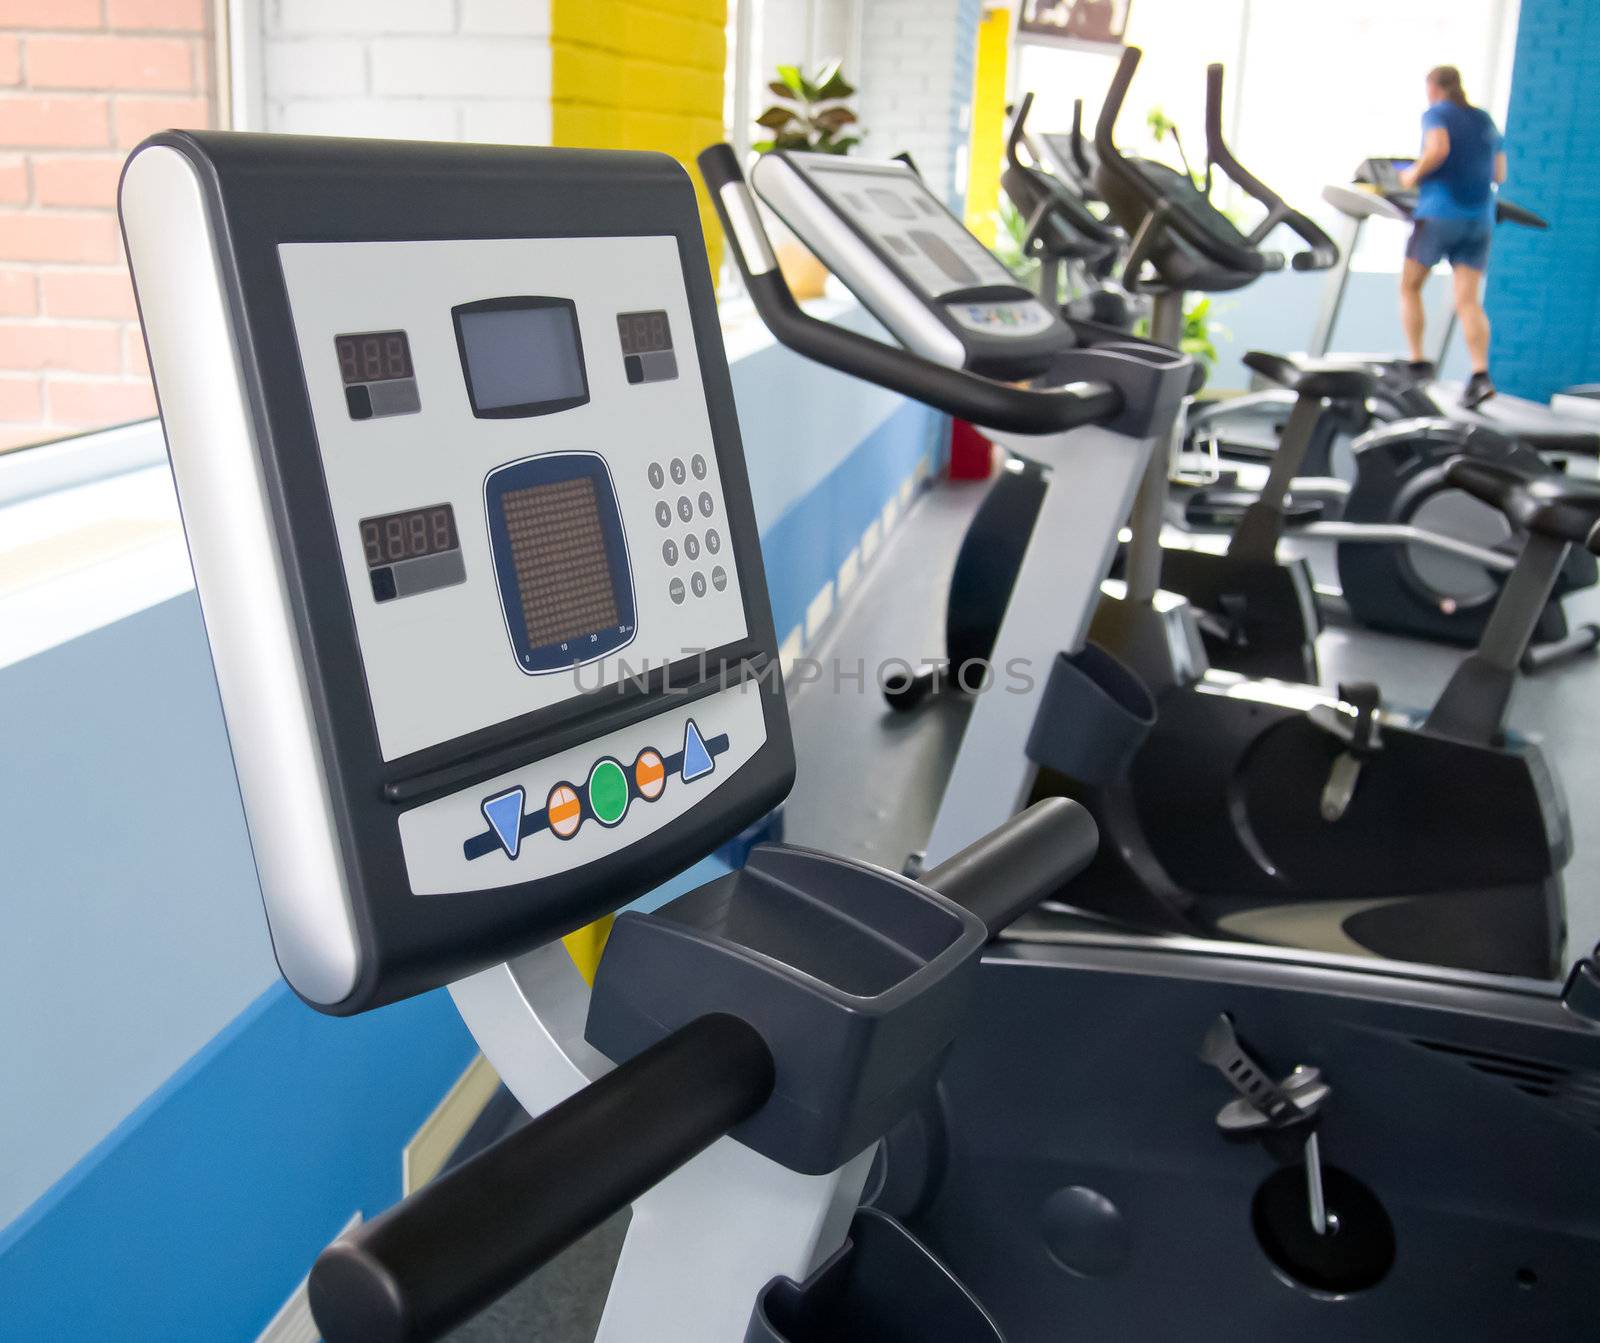 Cycling machines, treadmils and other fitness club equipment